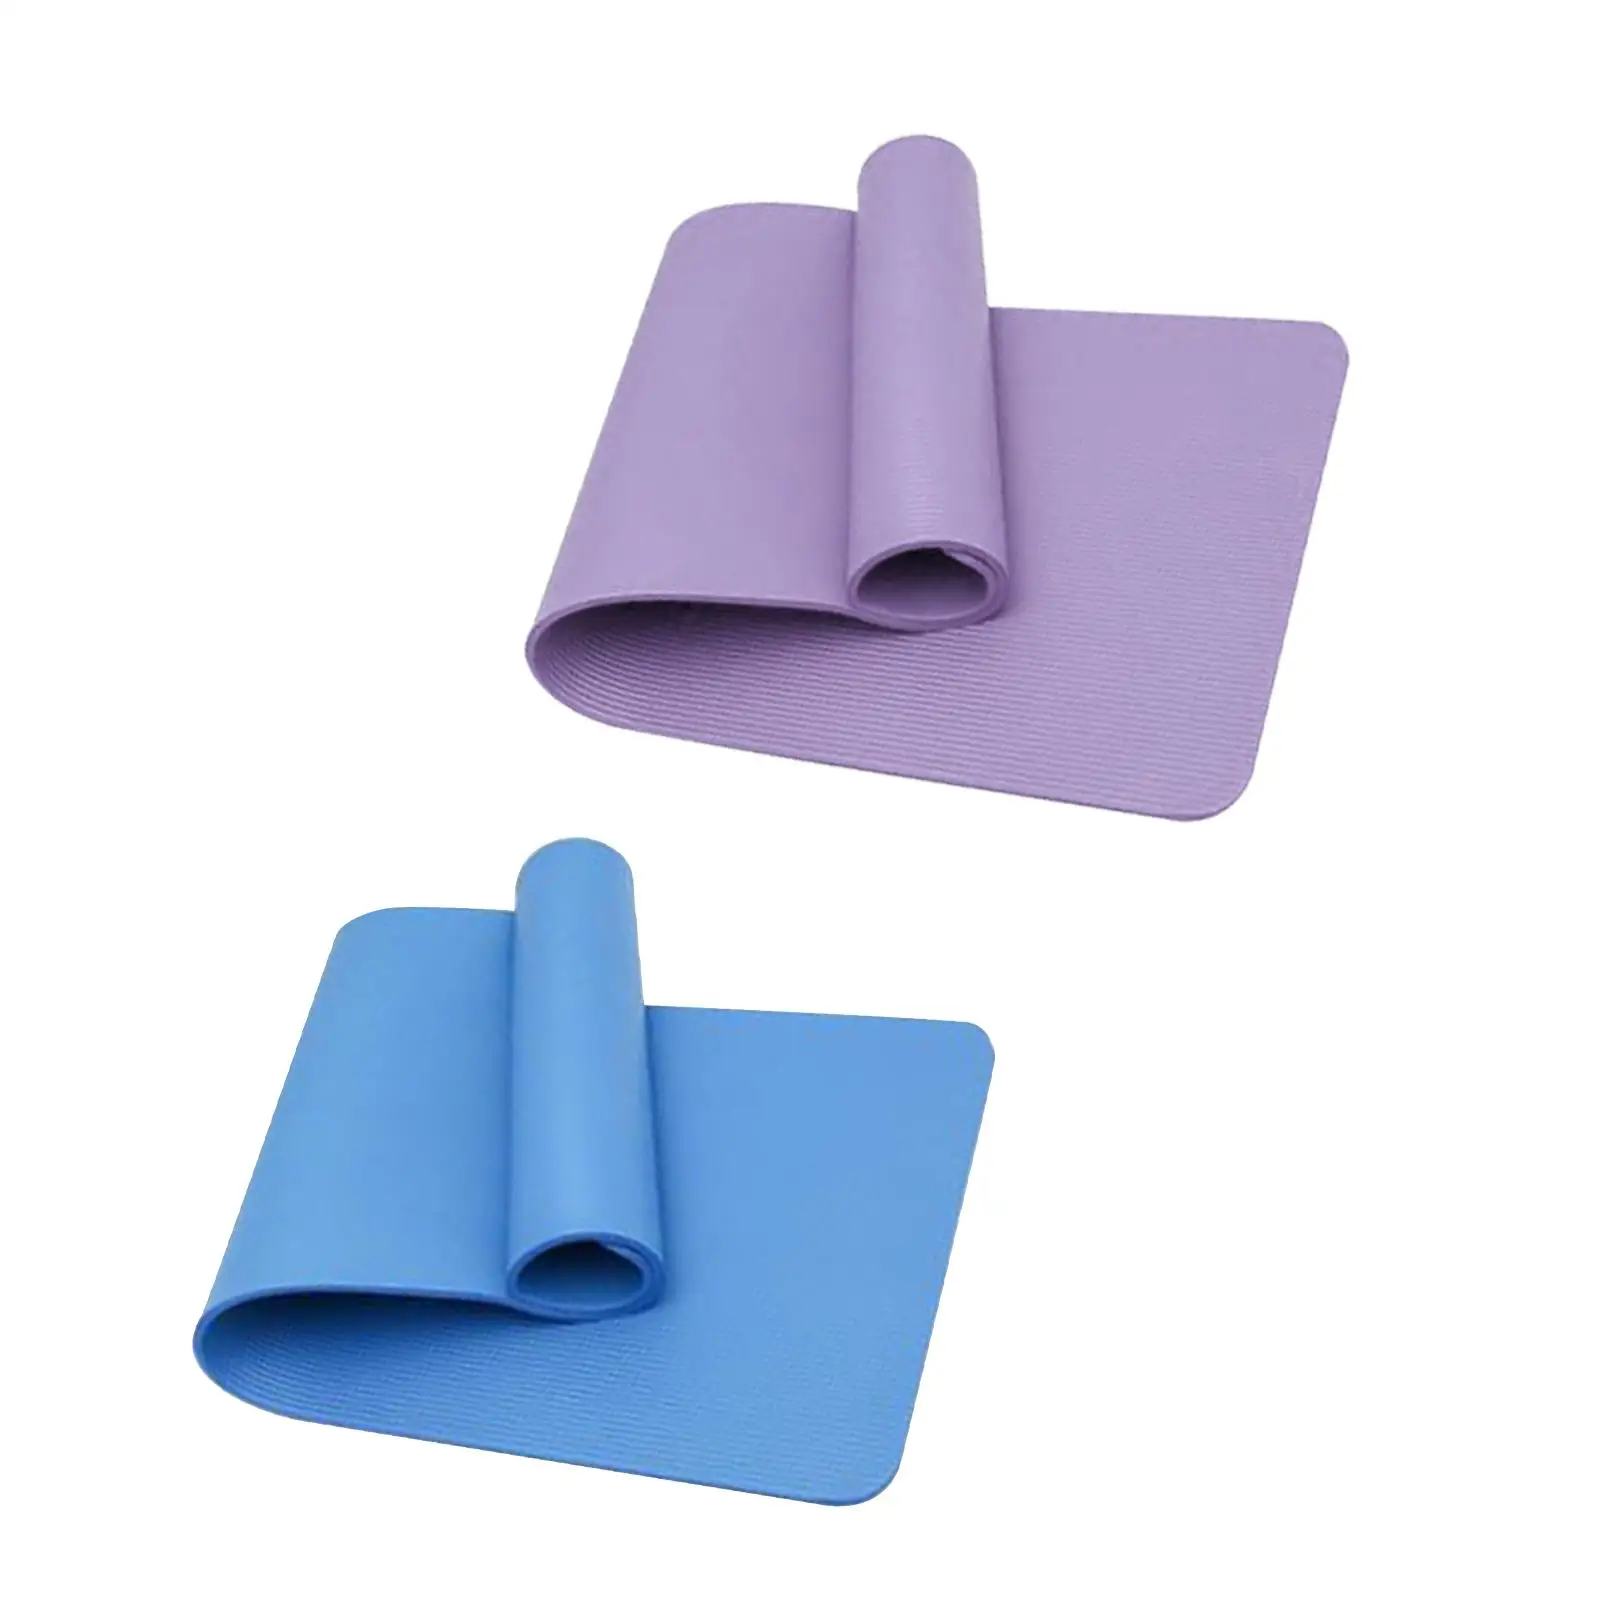 Yoga Mats Sports Fitness Mats Cushion Widened Thickened Lengthened Anti Skid Men and Women Knee Pad for Dance Home Gym Floor